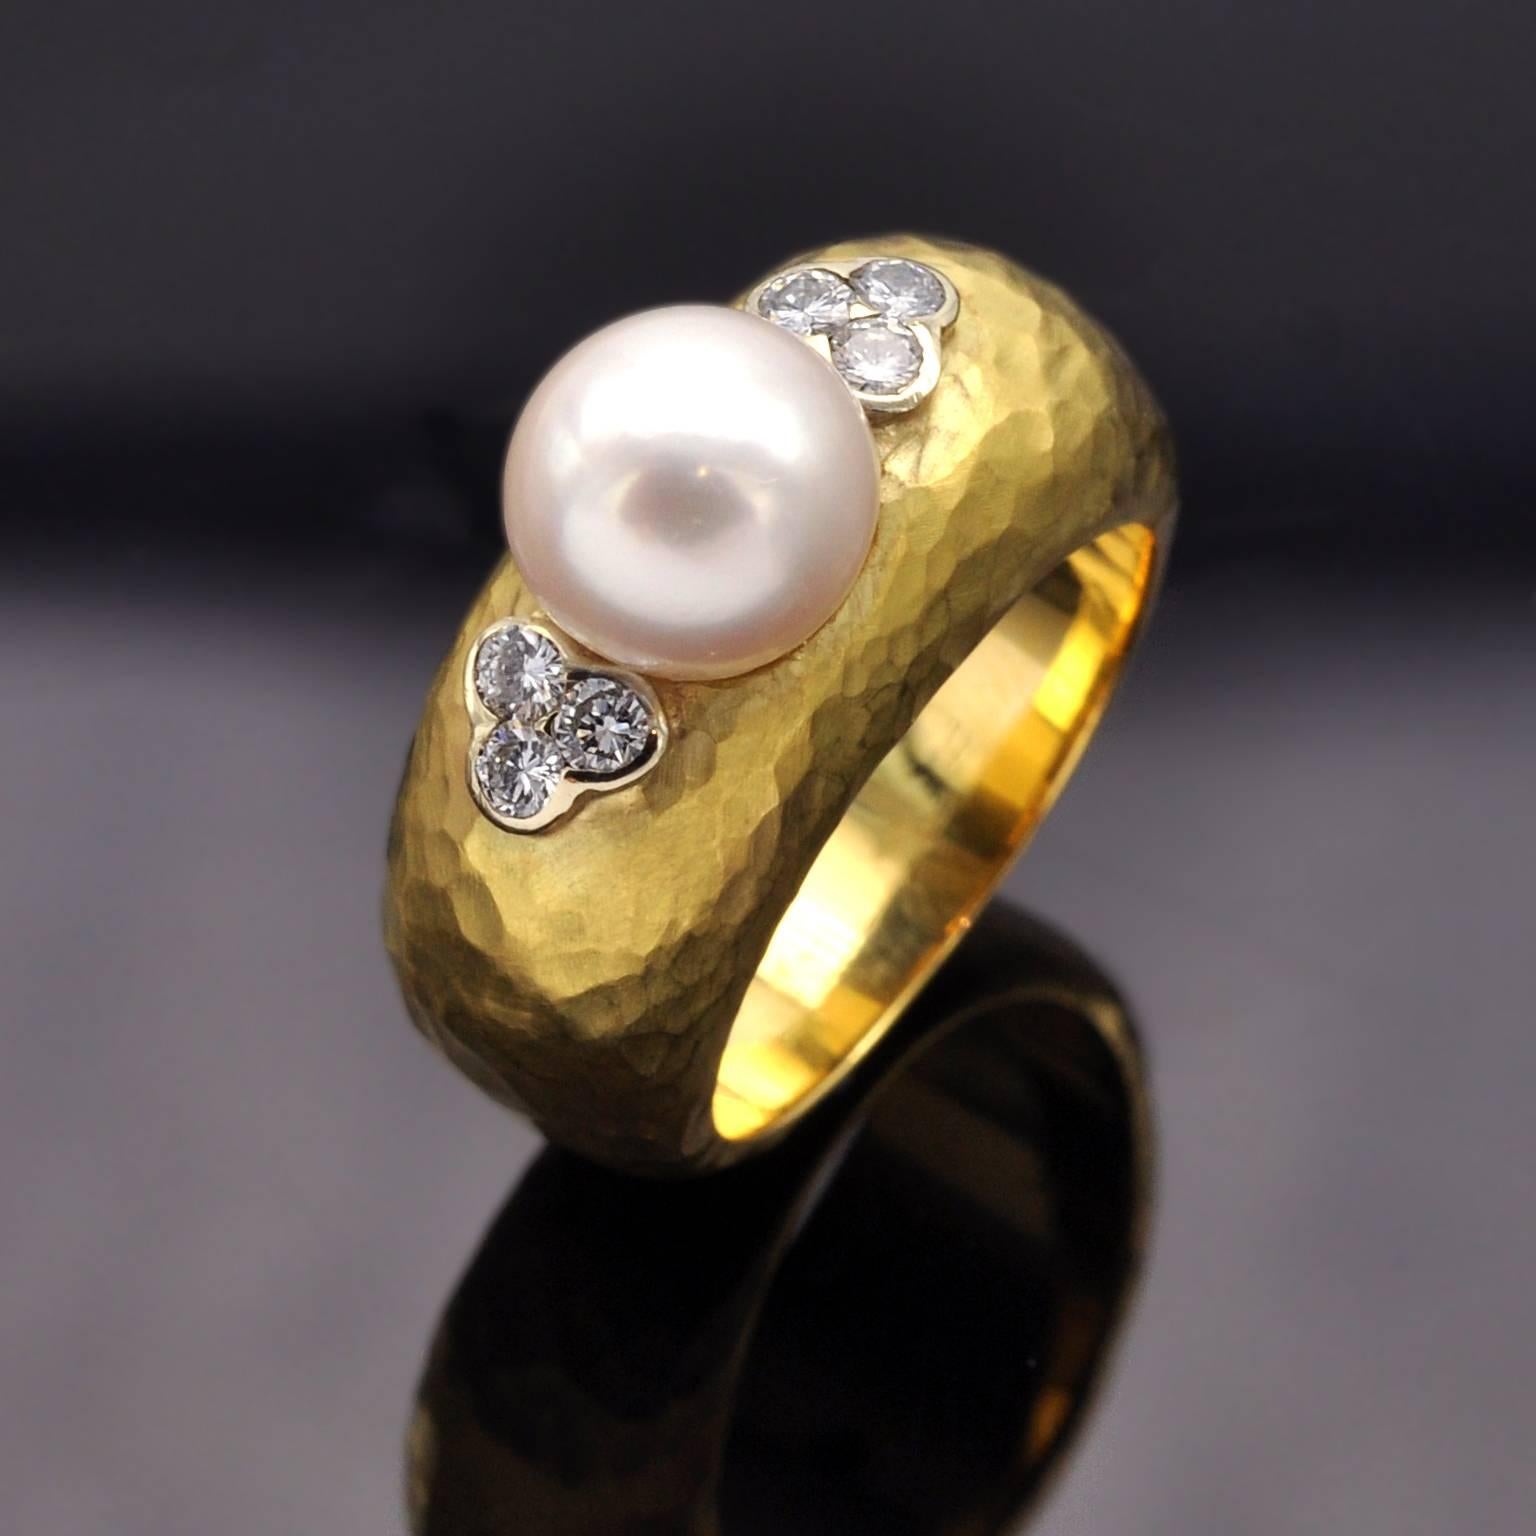 Hand hammered 18kt gold gorgeous ring, with a 8.5mm round pearl in it center on each side of which 3 diamonds are set in a clover shaped white gold fitting.


